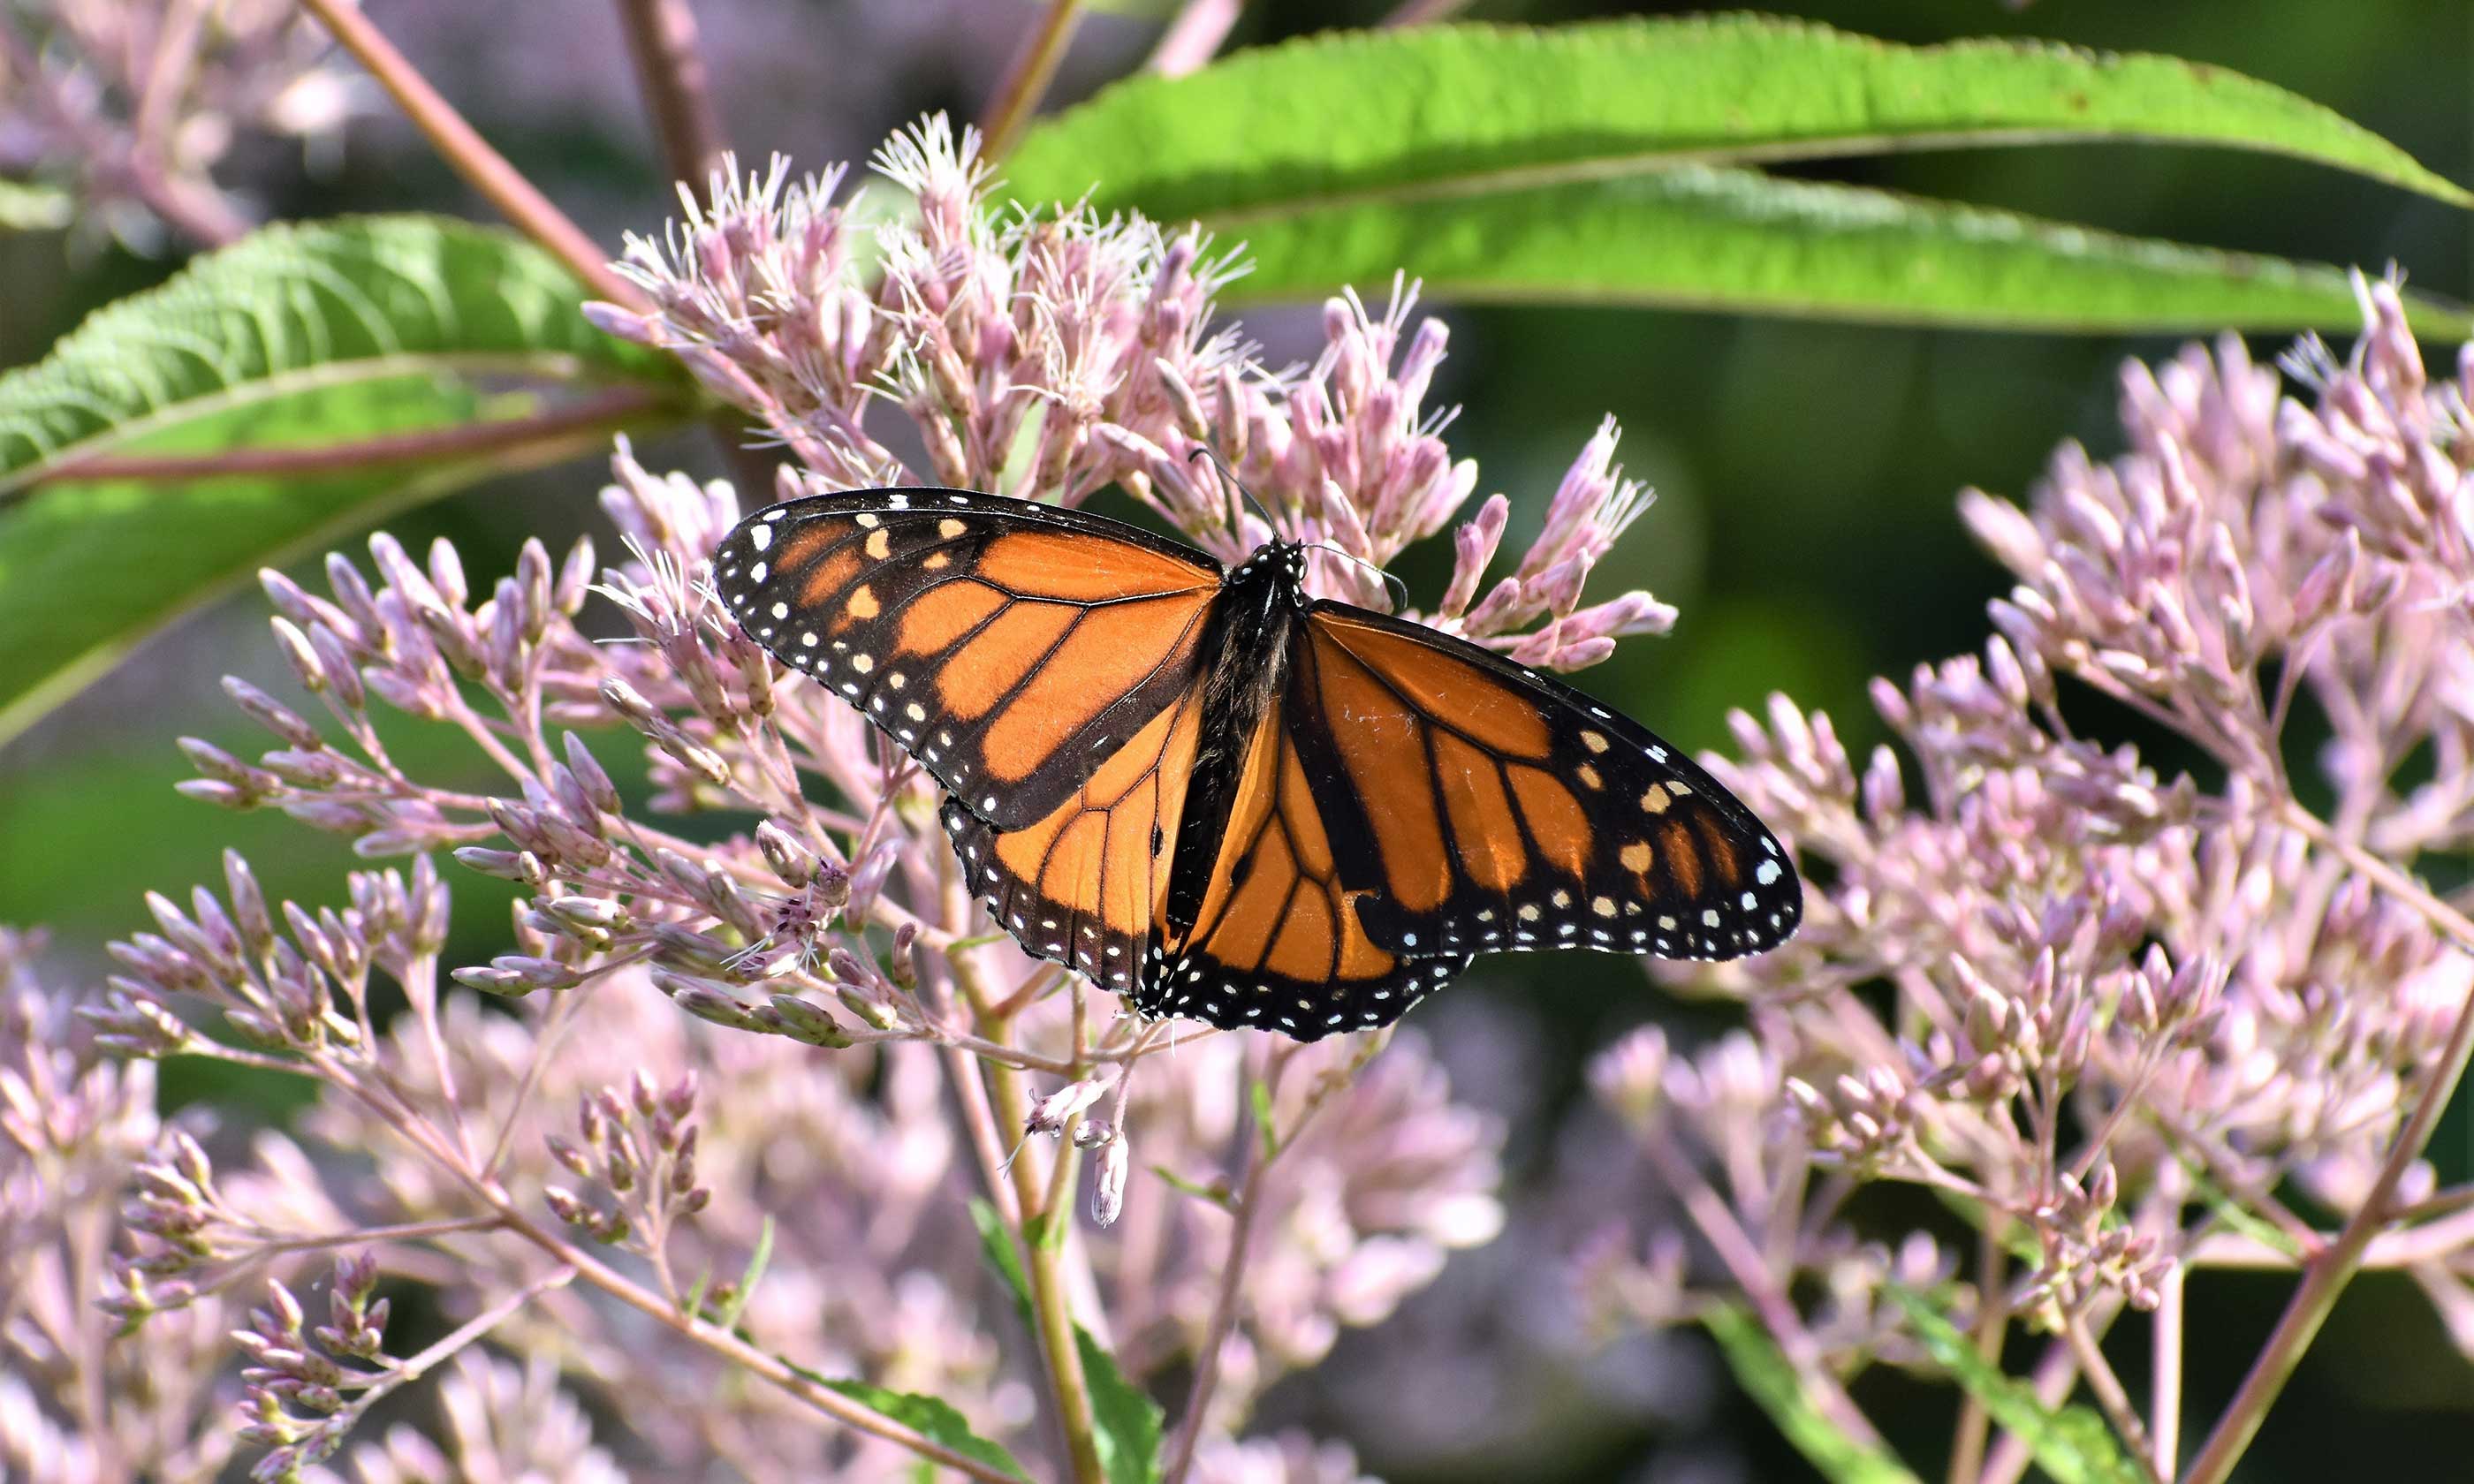 A monarch butterfly on milkweed plantings